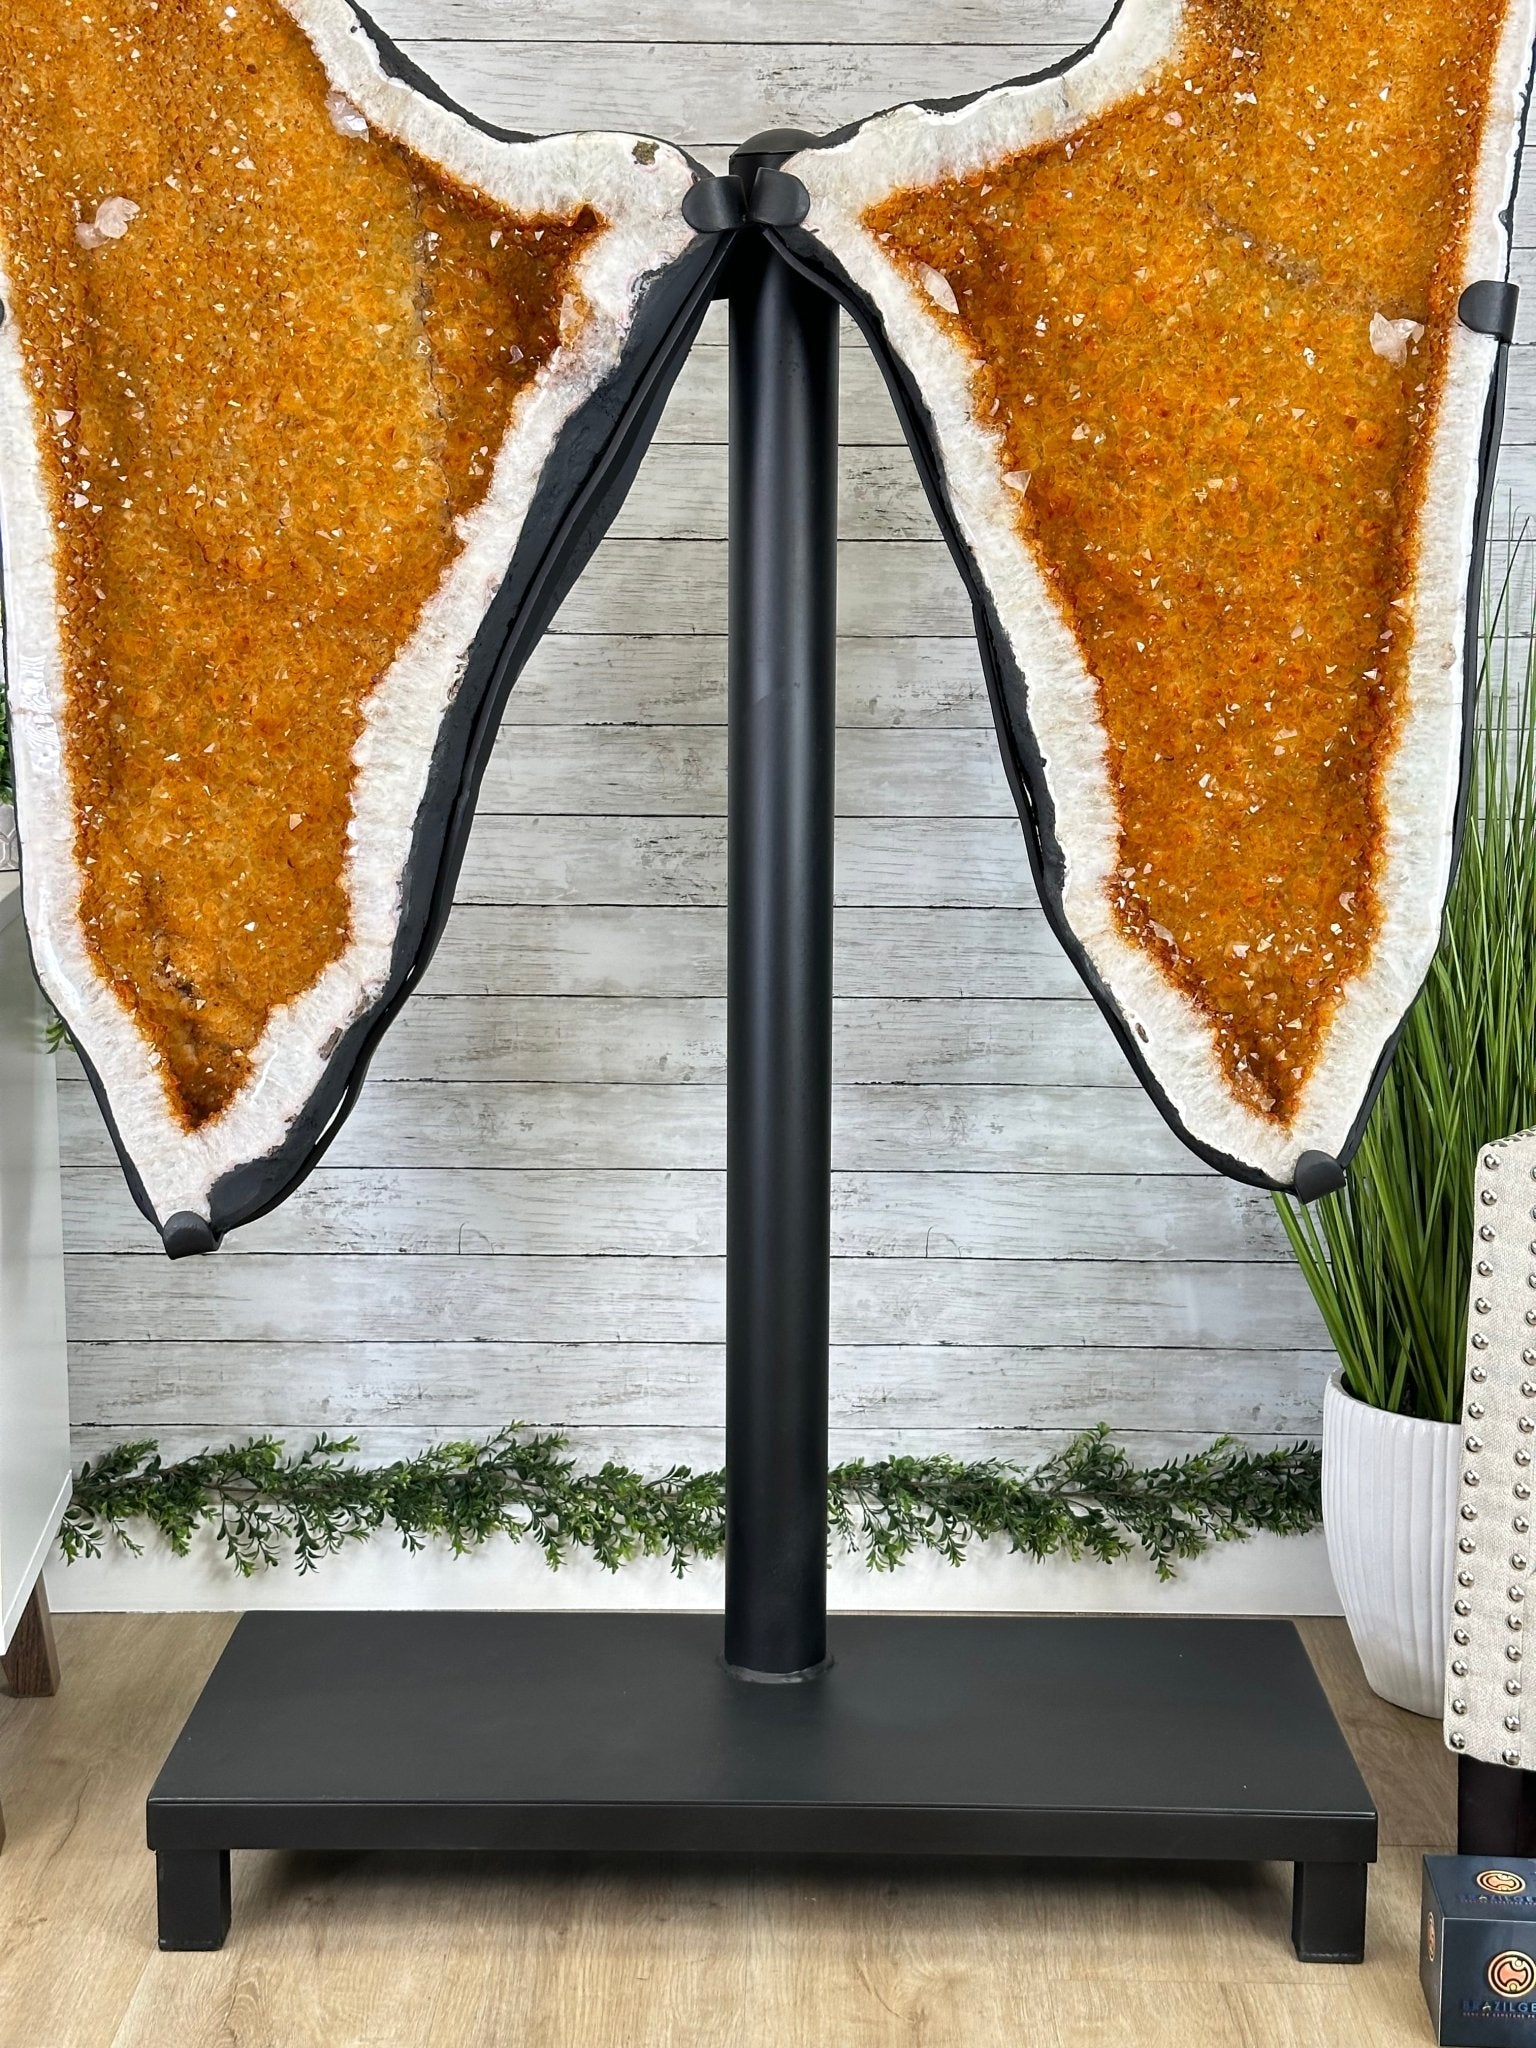 Large Citrine Butterfly Wings on a Metal Stand, 472 lbs & 71.6" Tall #5498-0006 - Brazil GemsBrazil GemsLarge Citrine Butterfly Wings on a Metal Stand, 472 lbs & 71.6" Tall #5498-0006Citrine Butterfly Wings5498-0006